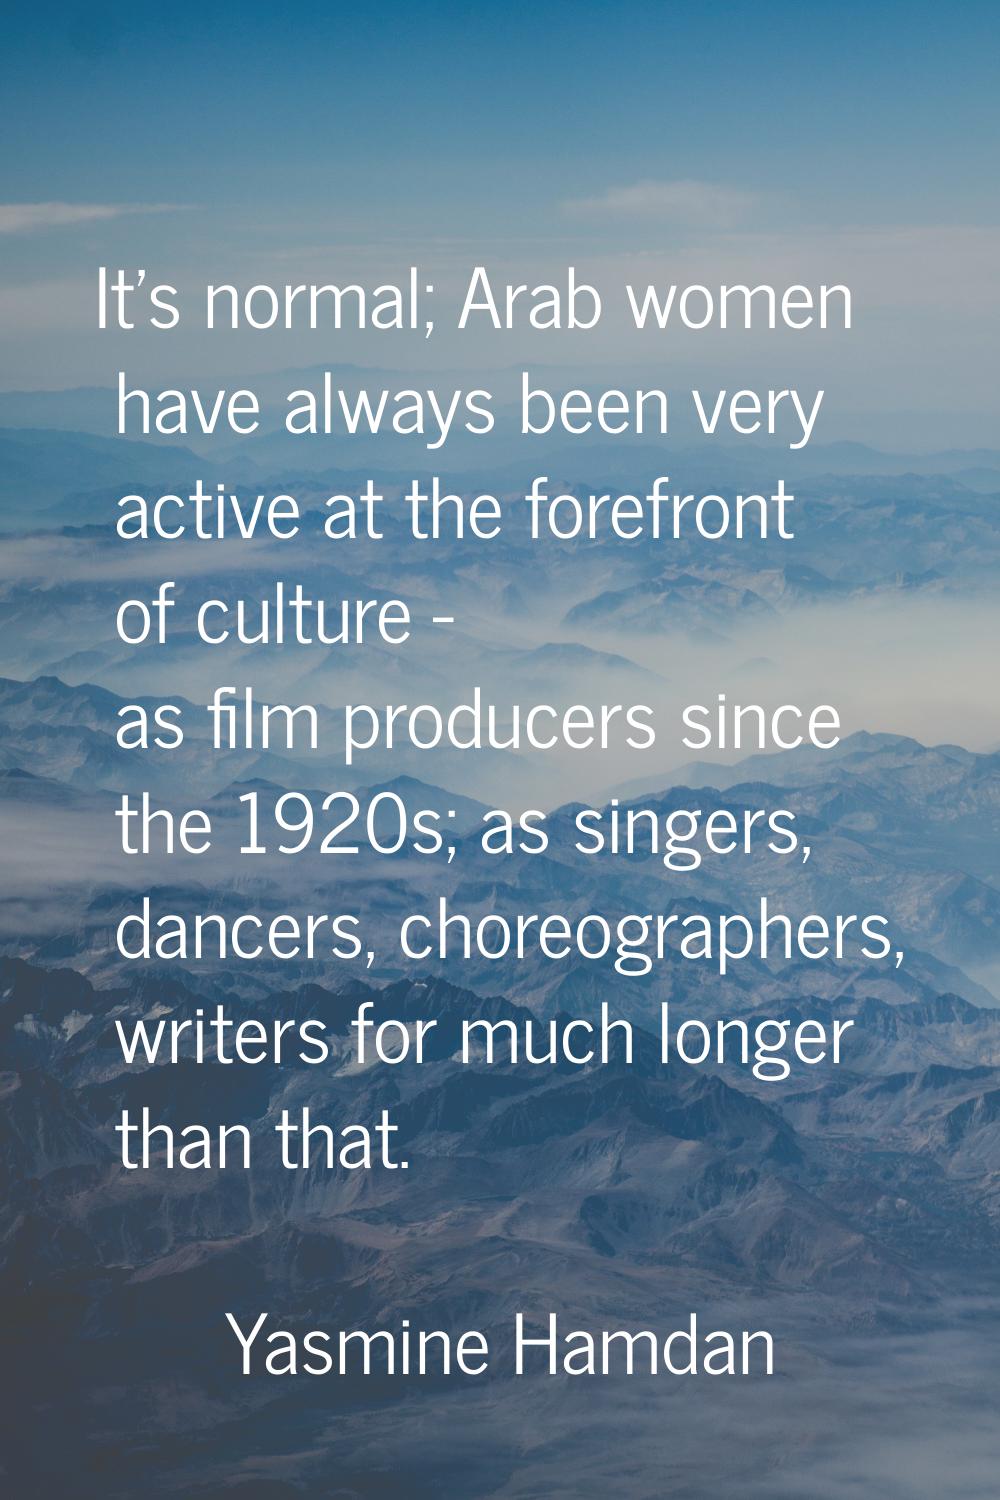 It's normal; Arab women have always been very active at the forefront of culture - as film producer